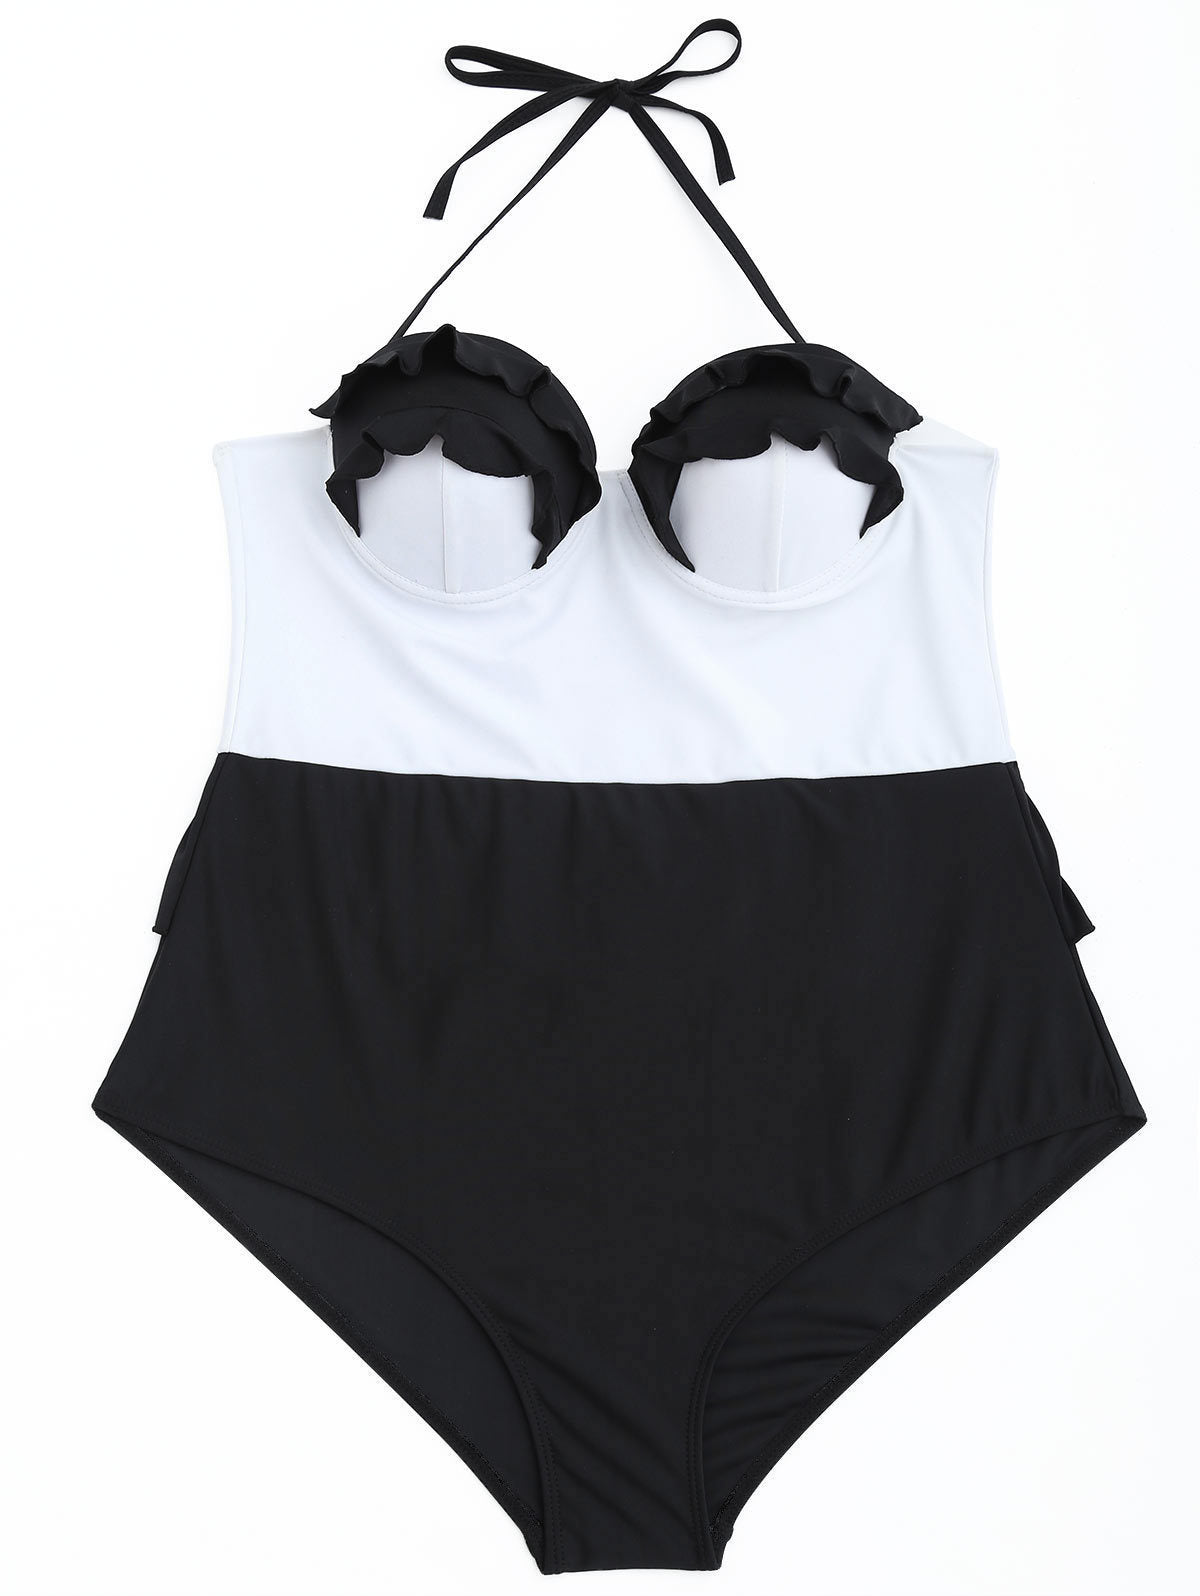 Swimsuit  | Women's Plus Size One Piece Black And White Patchwork Lace Swimsuit | White |  2XL| thecurvestory.myshopify.com